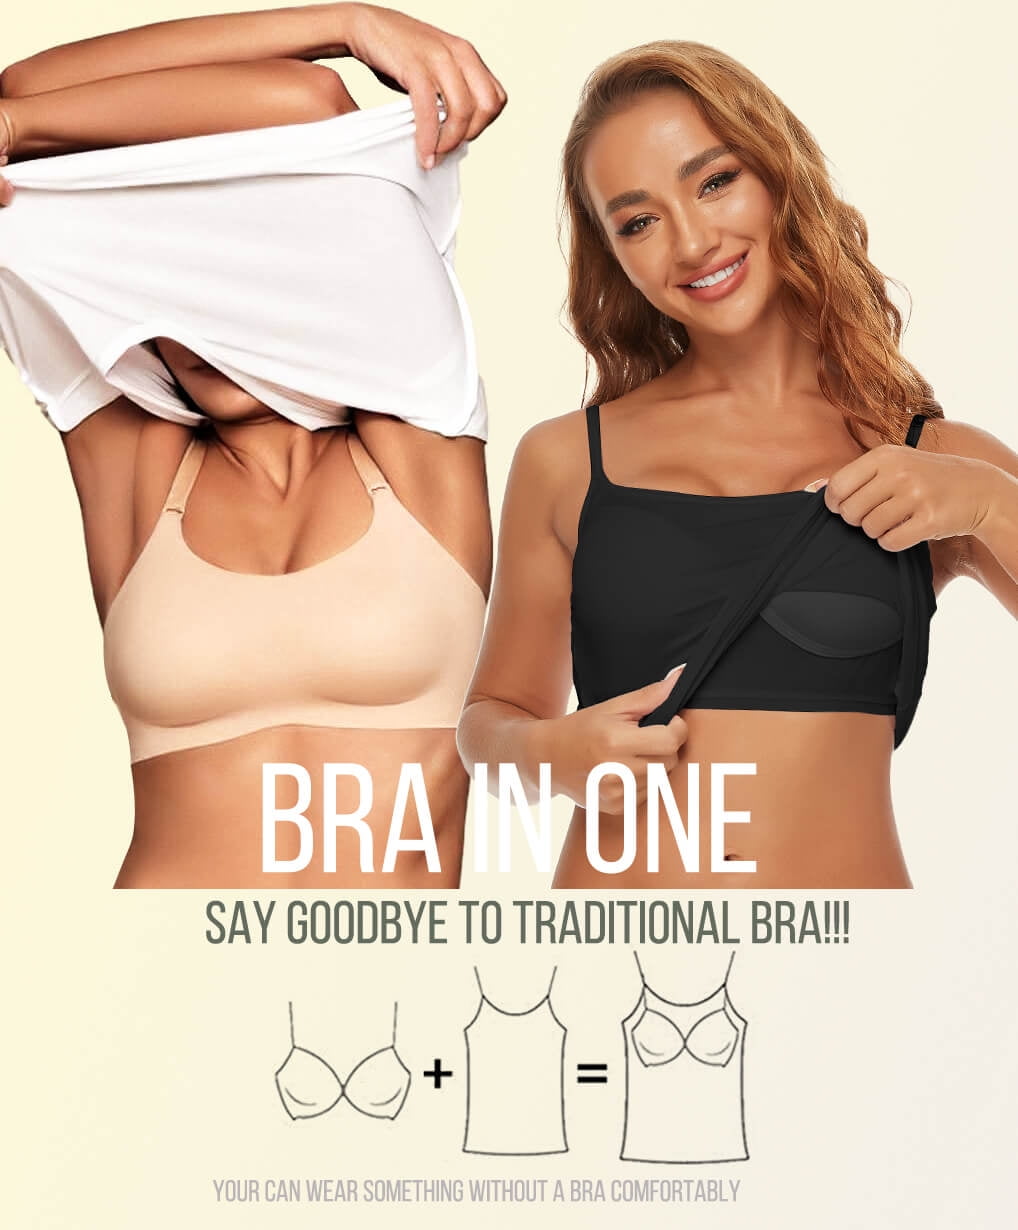 Women's 'Race You Back' Bra in Revive Made in Italian Fabric – Wear One's At